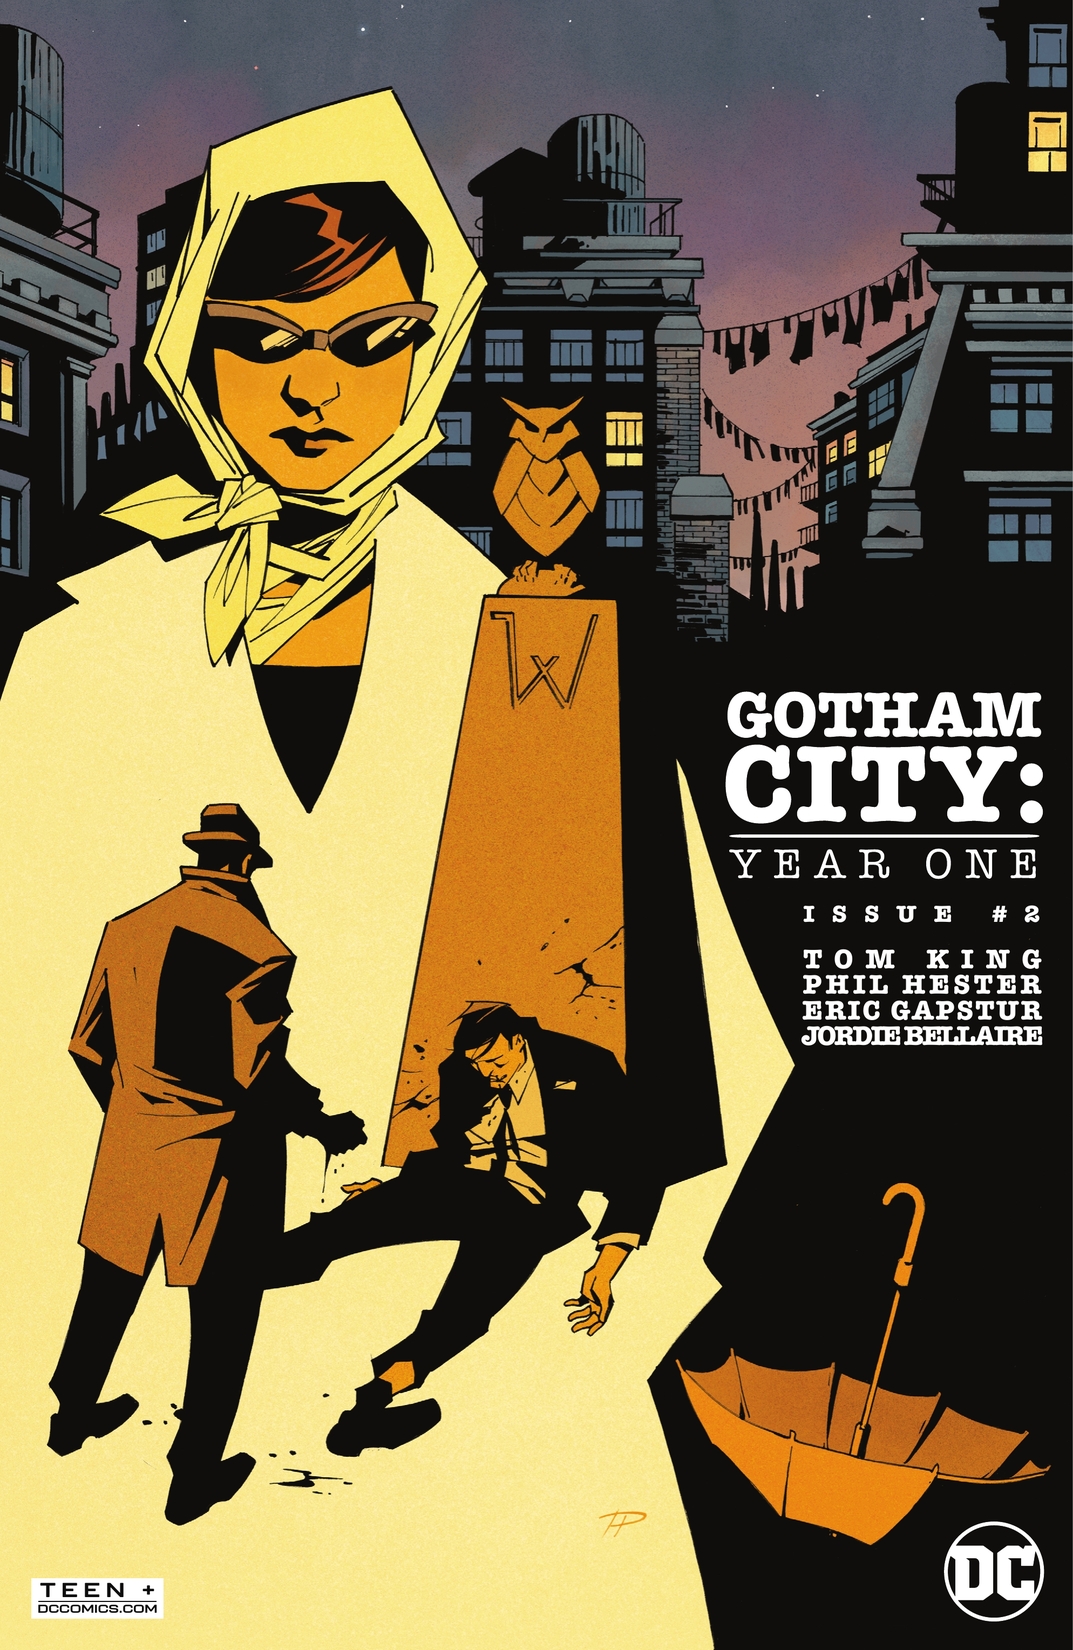 Gotham City: Year One #2 preview images